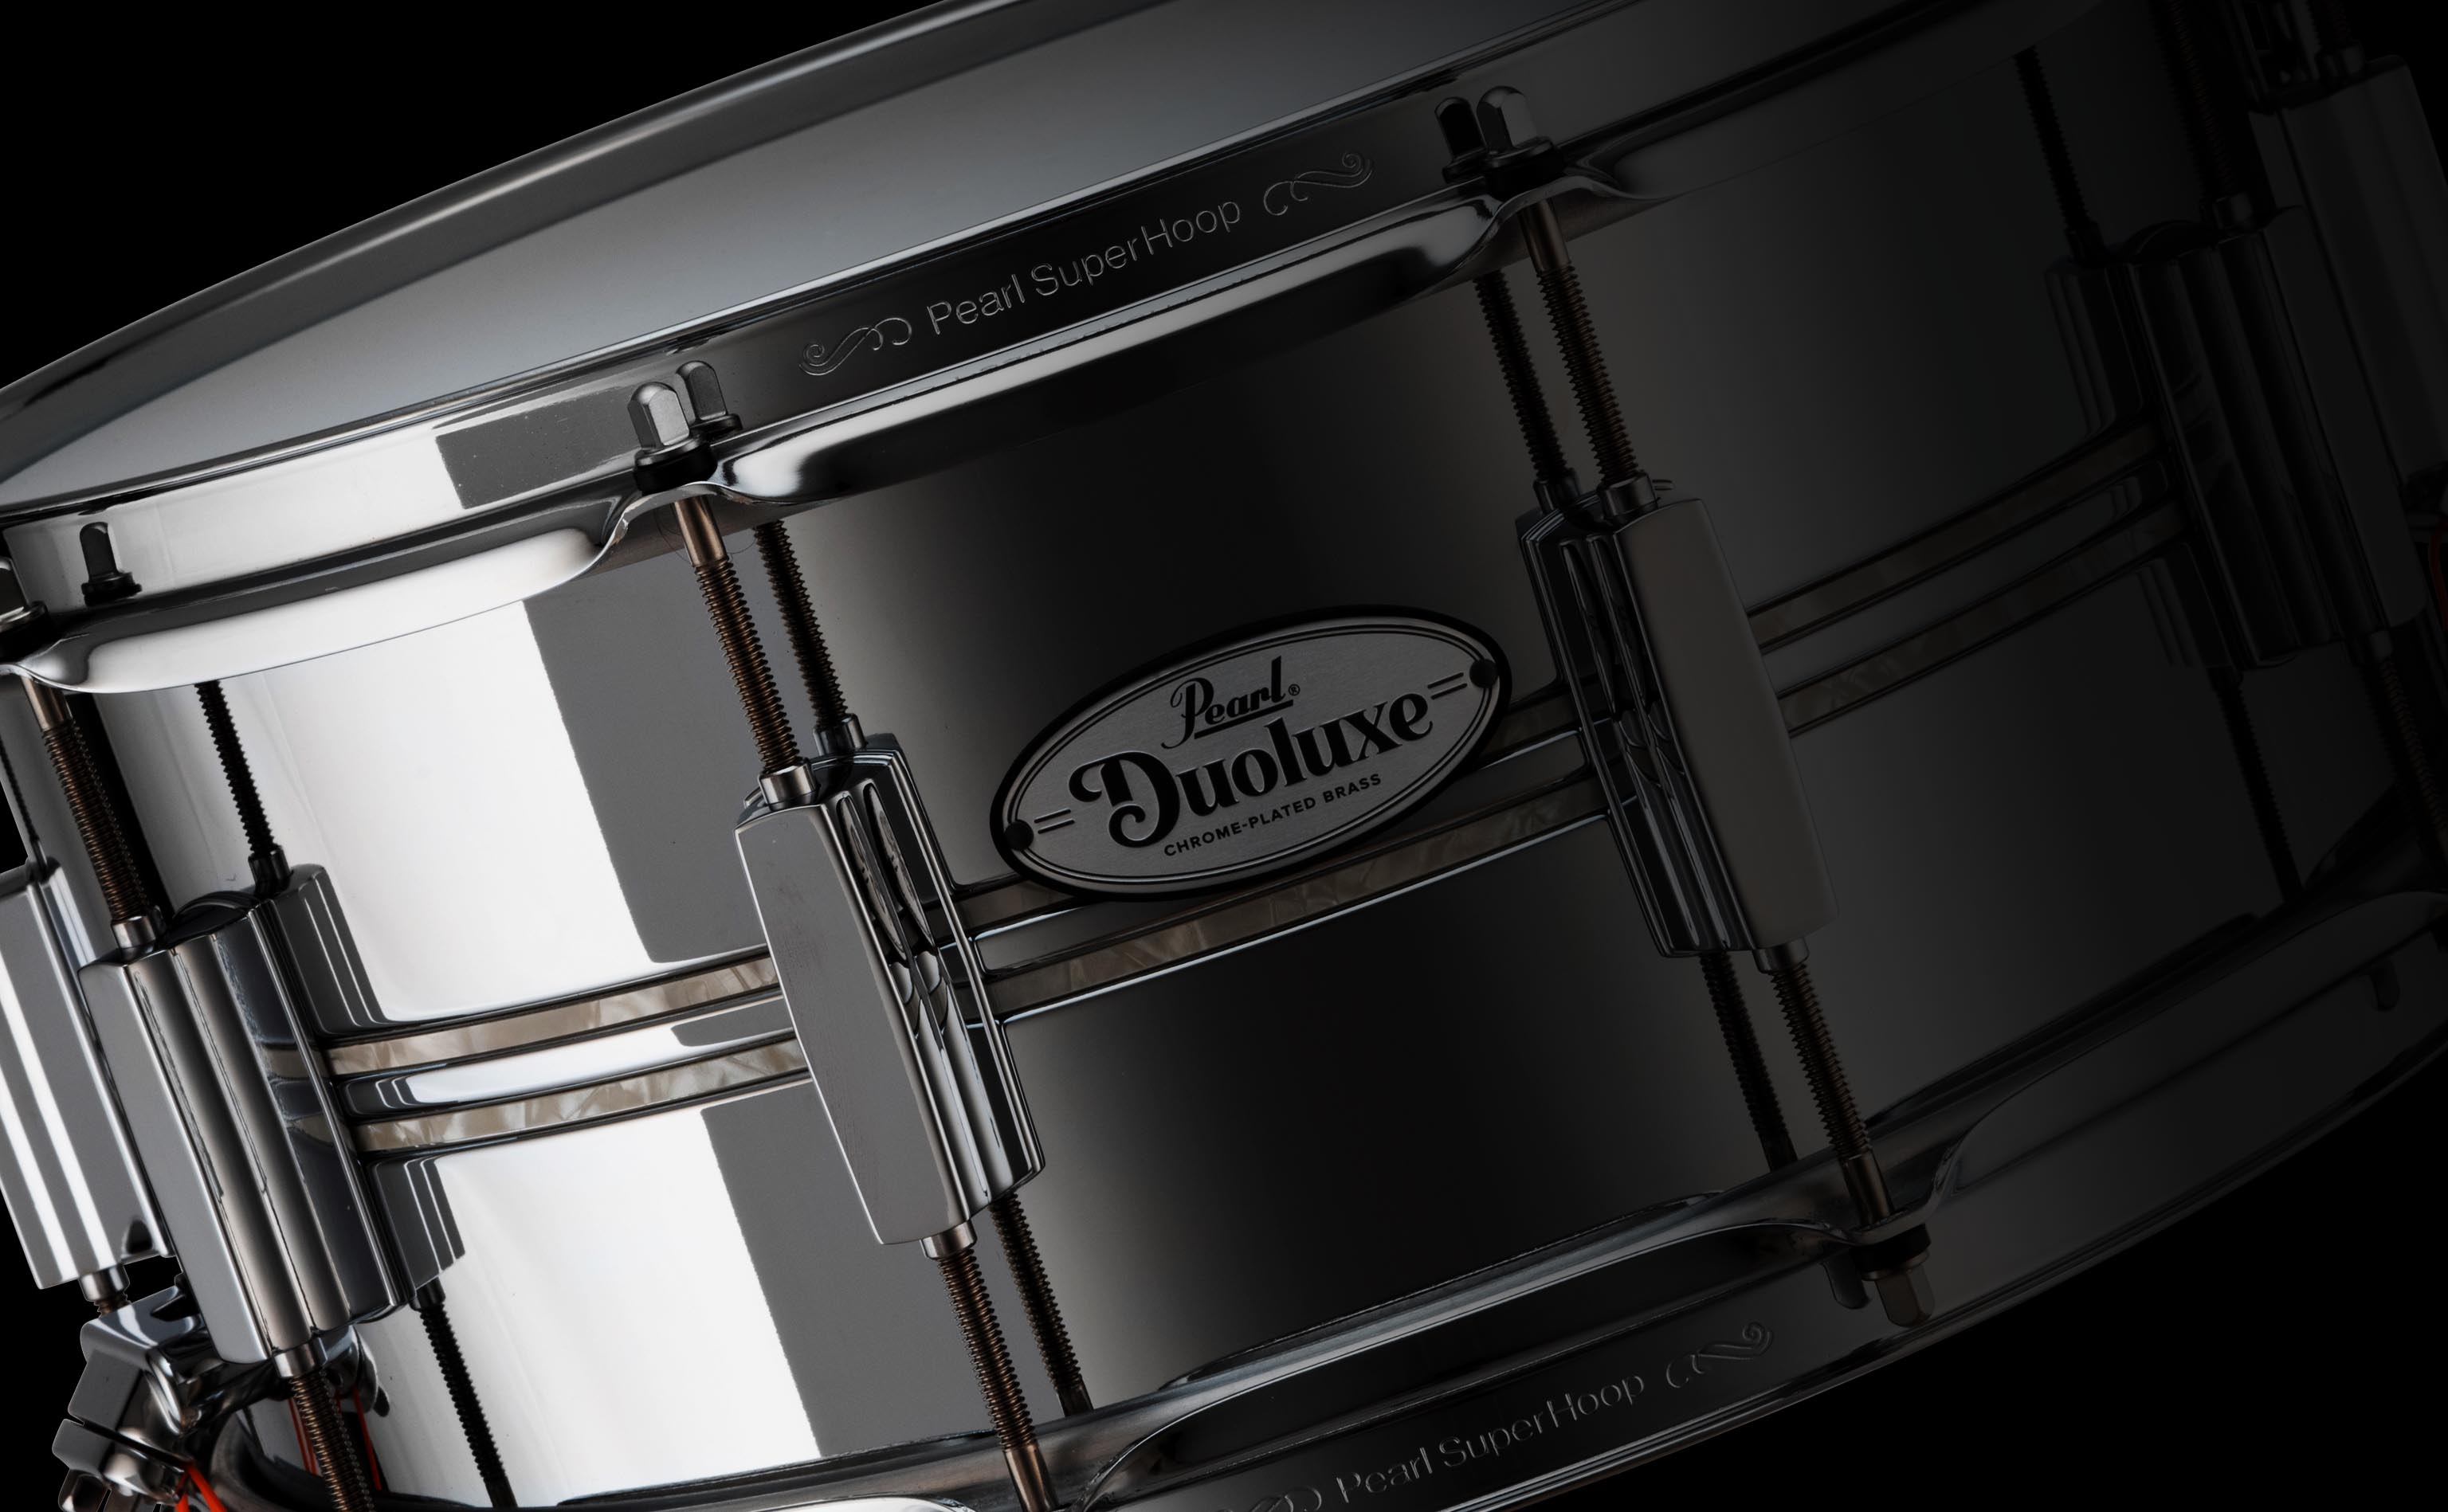 The Duoluxe Snare Drum | パール楽器【公式サイト】Pearl Drums